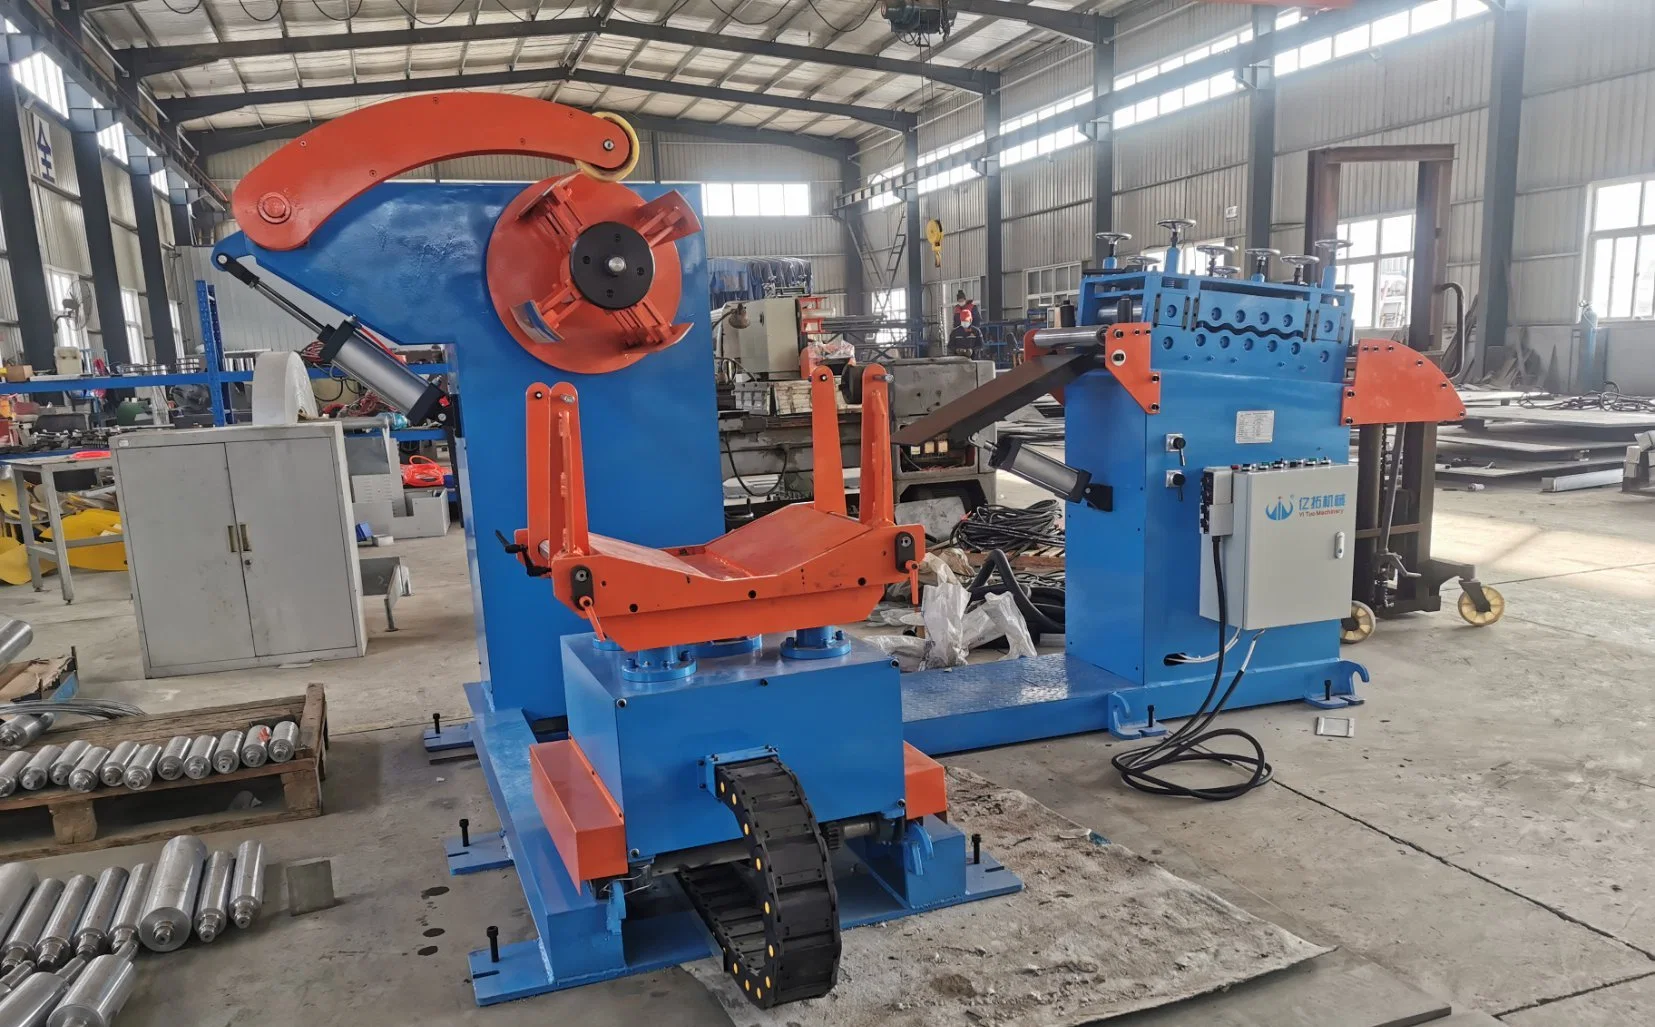 2 in 1 Decoiler with Straightener Machine for Metal Steel Plate Straightening Steel Coil Straightener with Decoiler Sheet Uncoiling and Leveling Machine